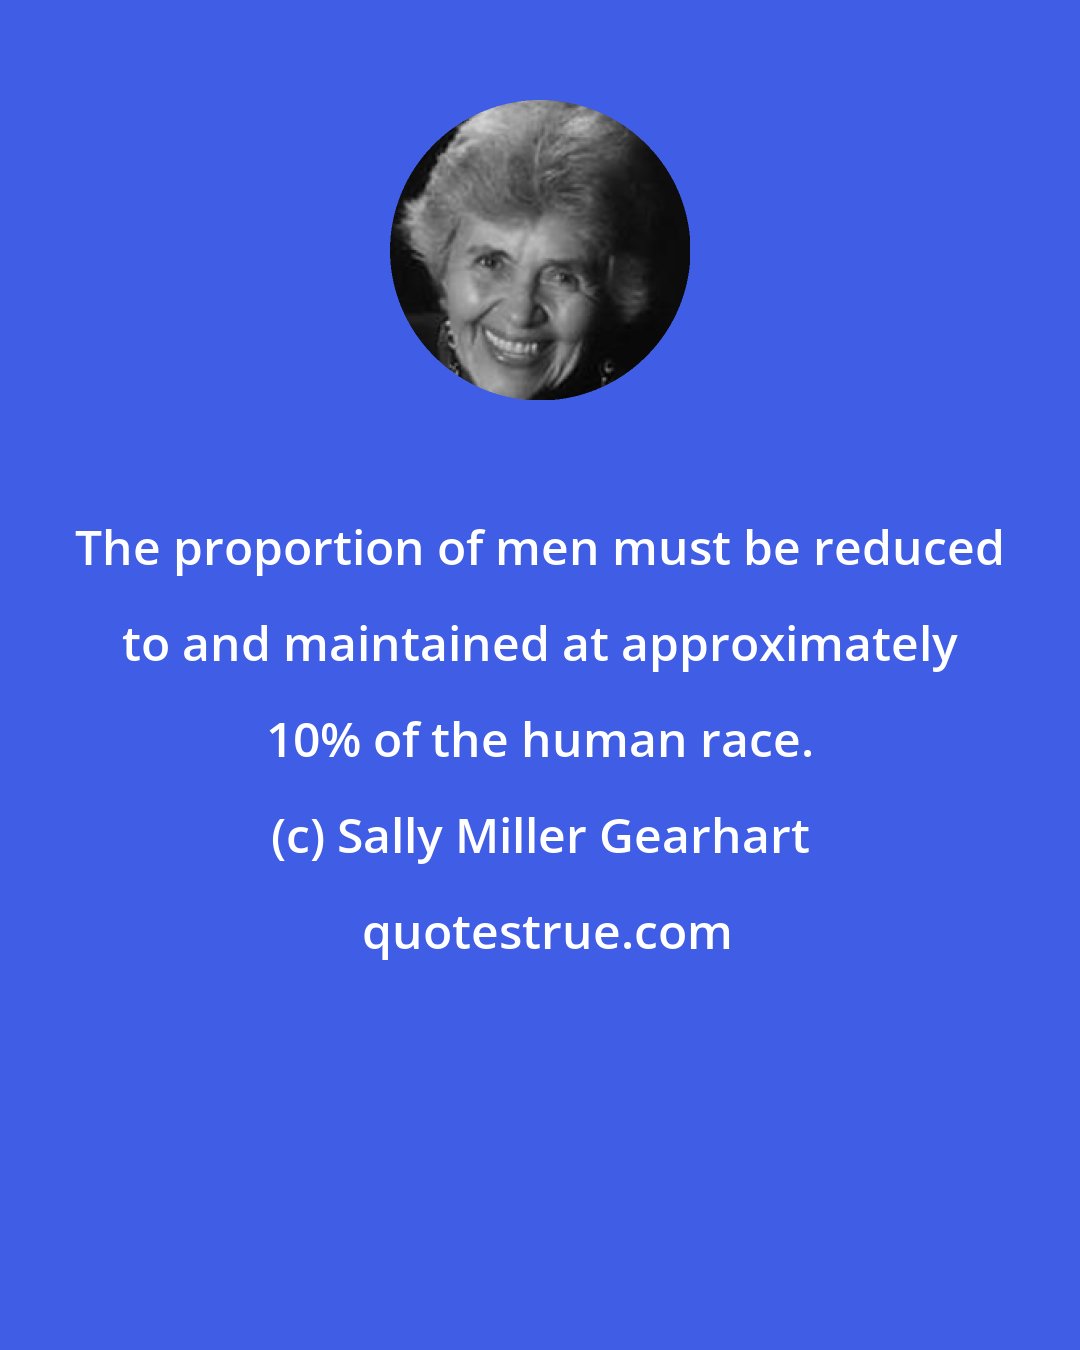 Sally Miller Gearhart: The proportion of men must be reduced to and maintained at approximately 10% of the human race.